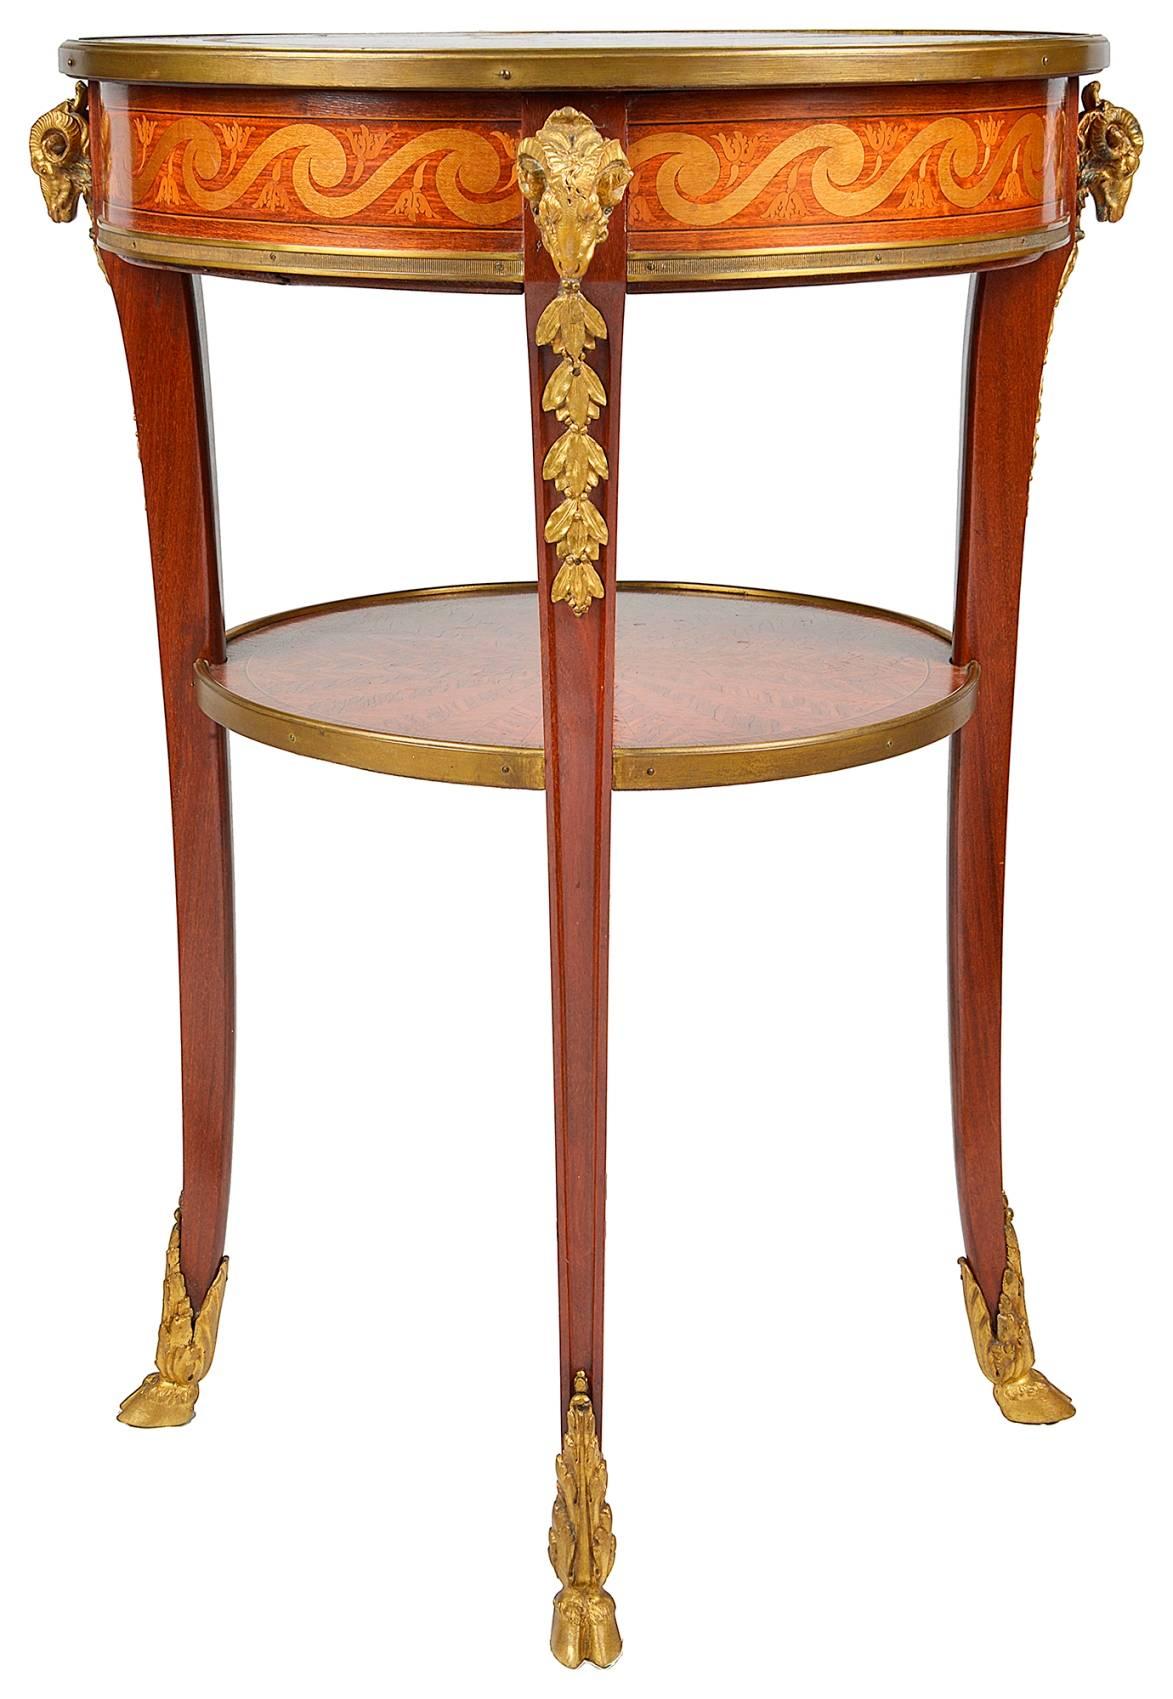 A good quality marquetry and parquetry inlaid side table, in the style of Louis XV. Having radiating veneers from center tabletop with marquetry crossbanding. Gilded ormolu ram's head mounts to the four out swept legs and an under tier.